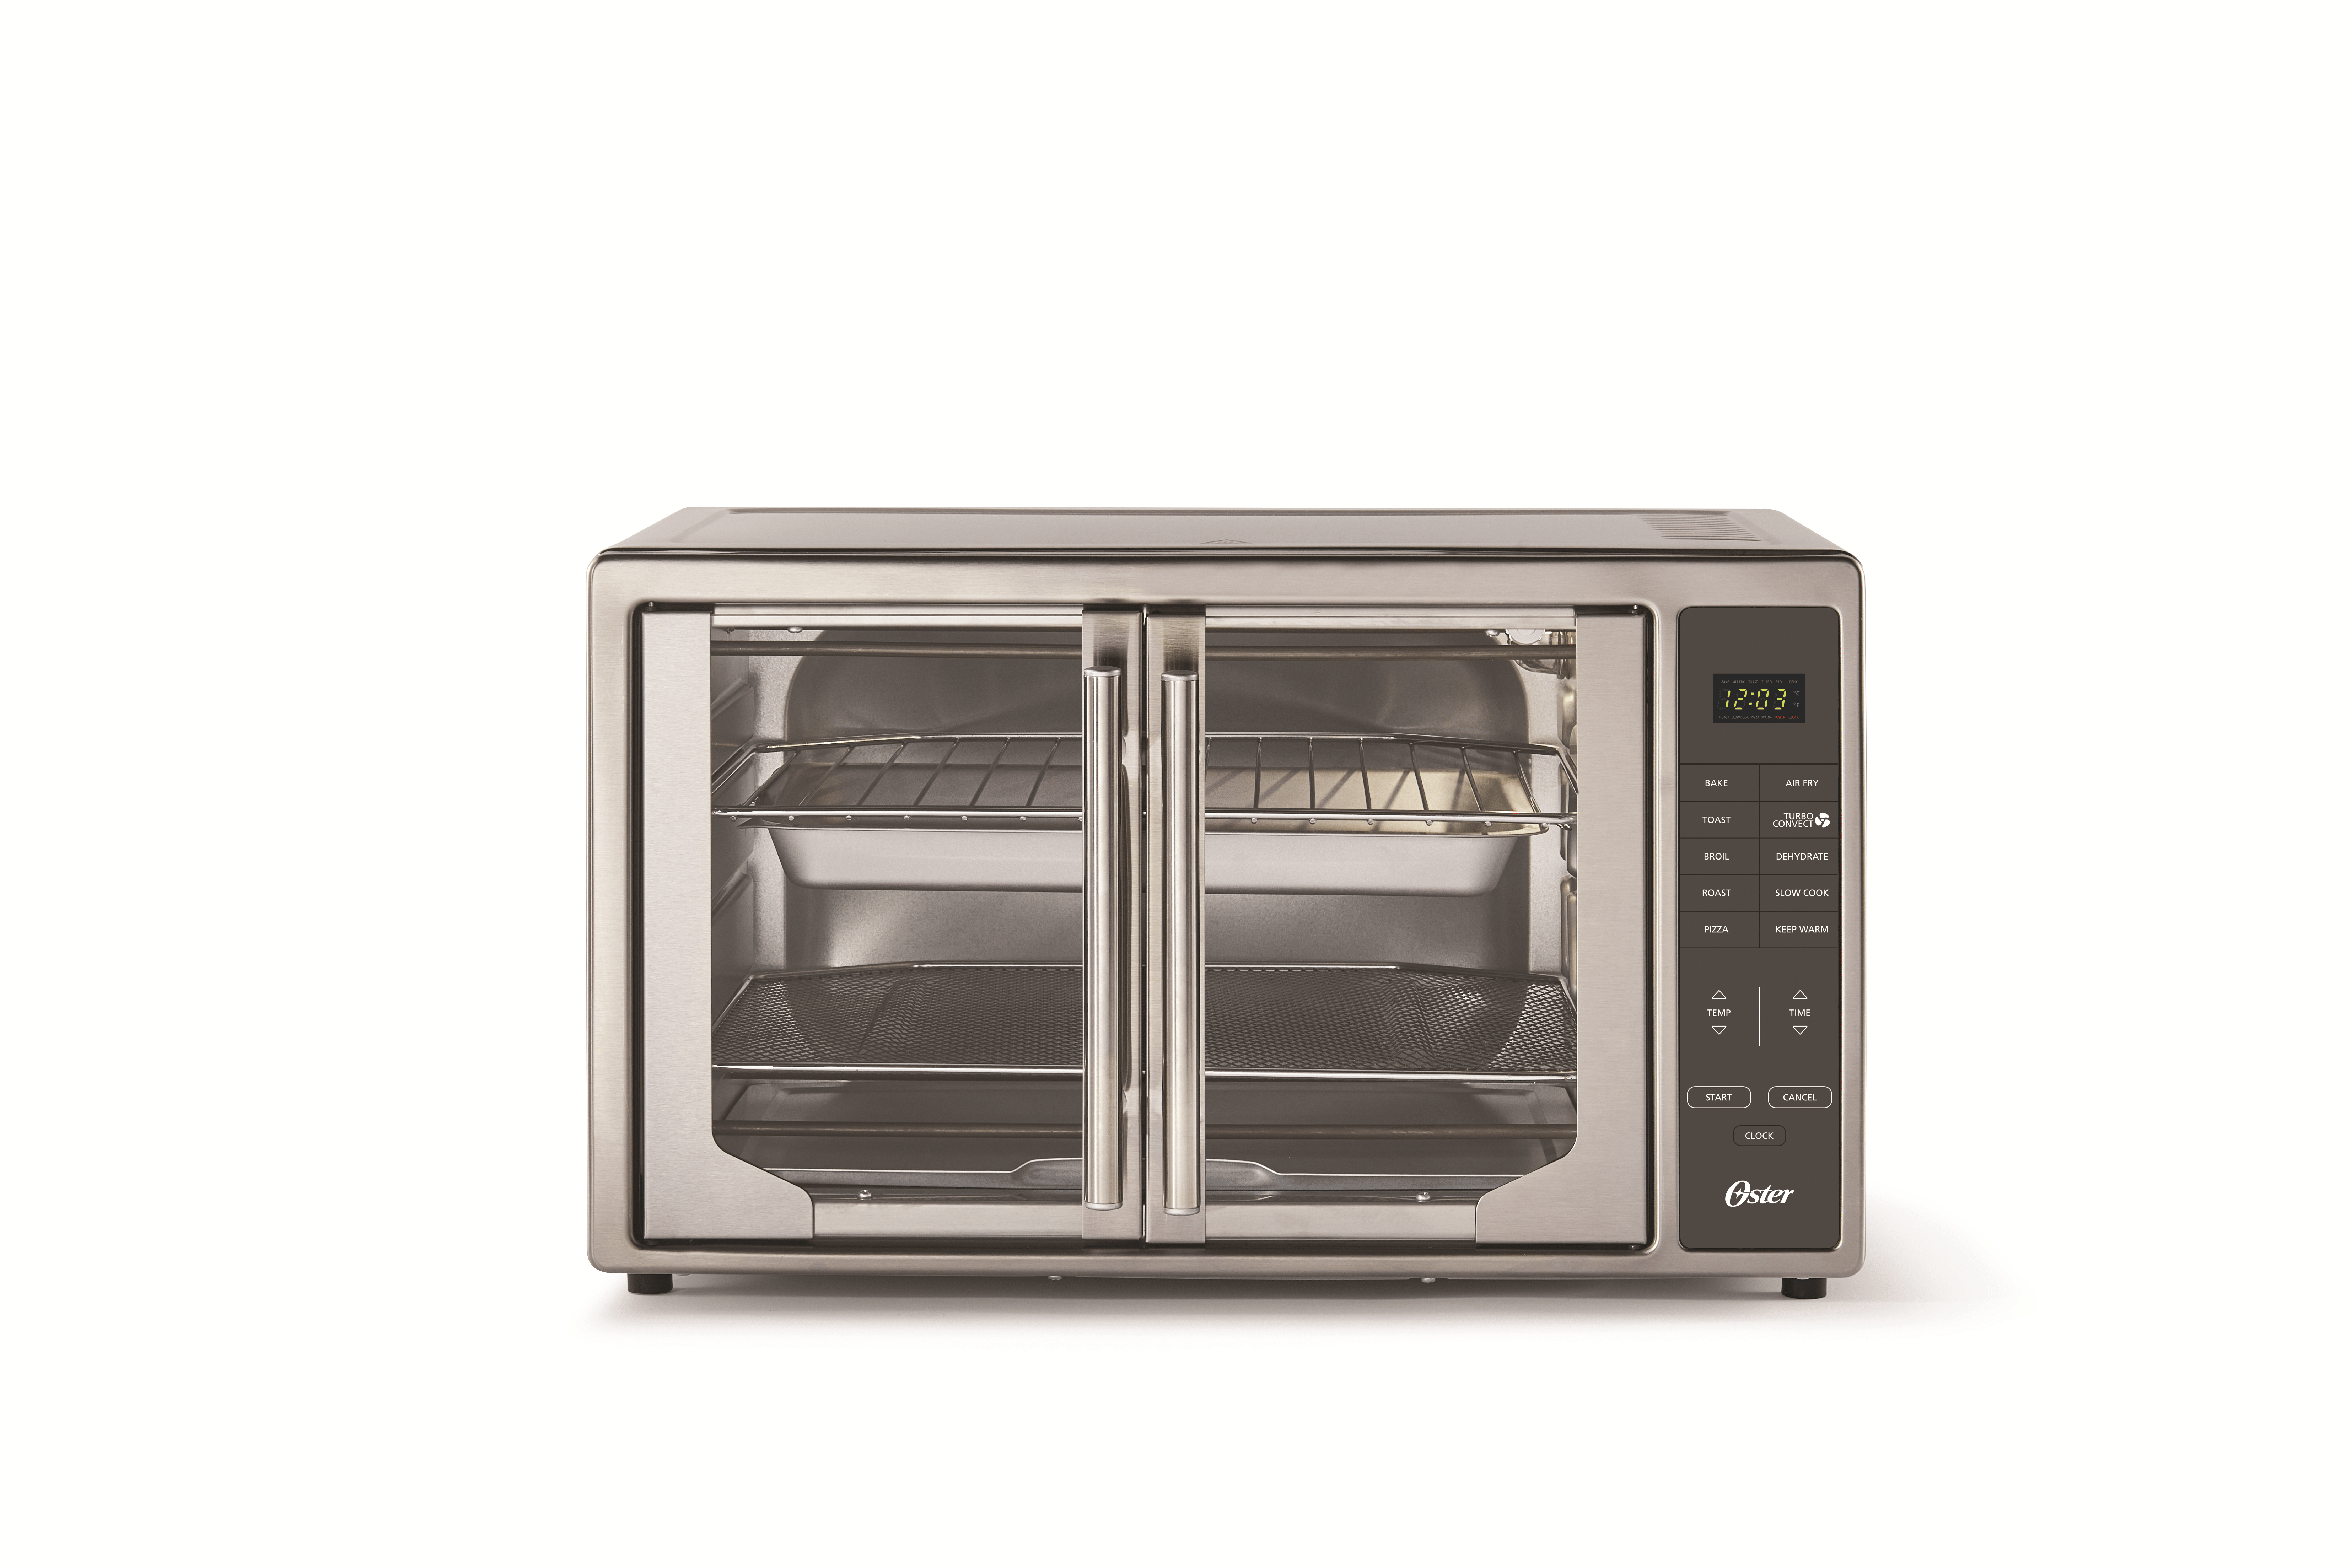 Oster TSSTTVFDDAF-026 1700W French Door Air Fry Convection Toaster Oven  53891154871